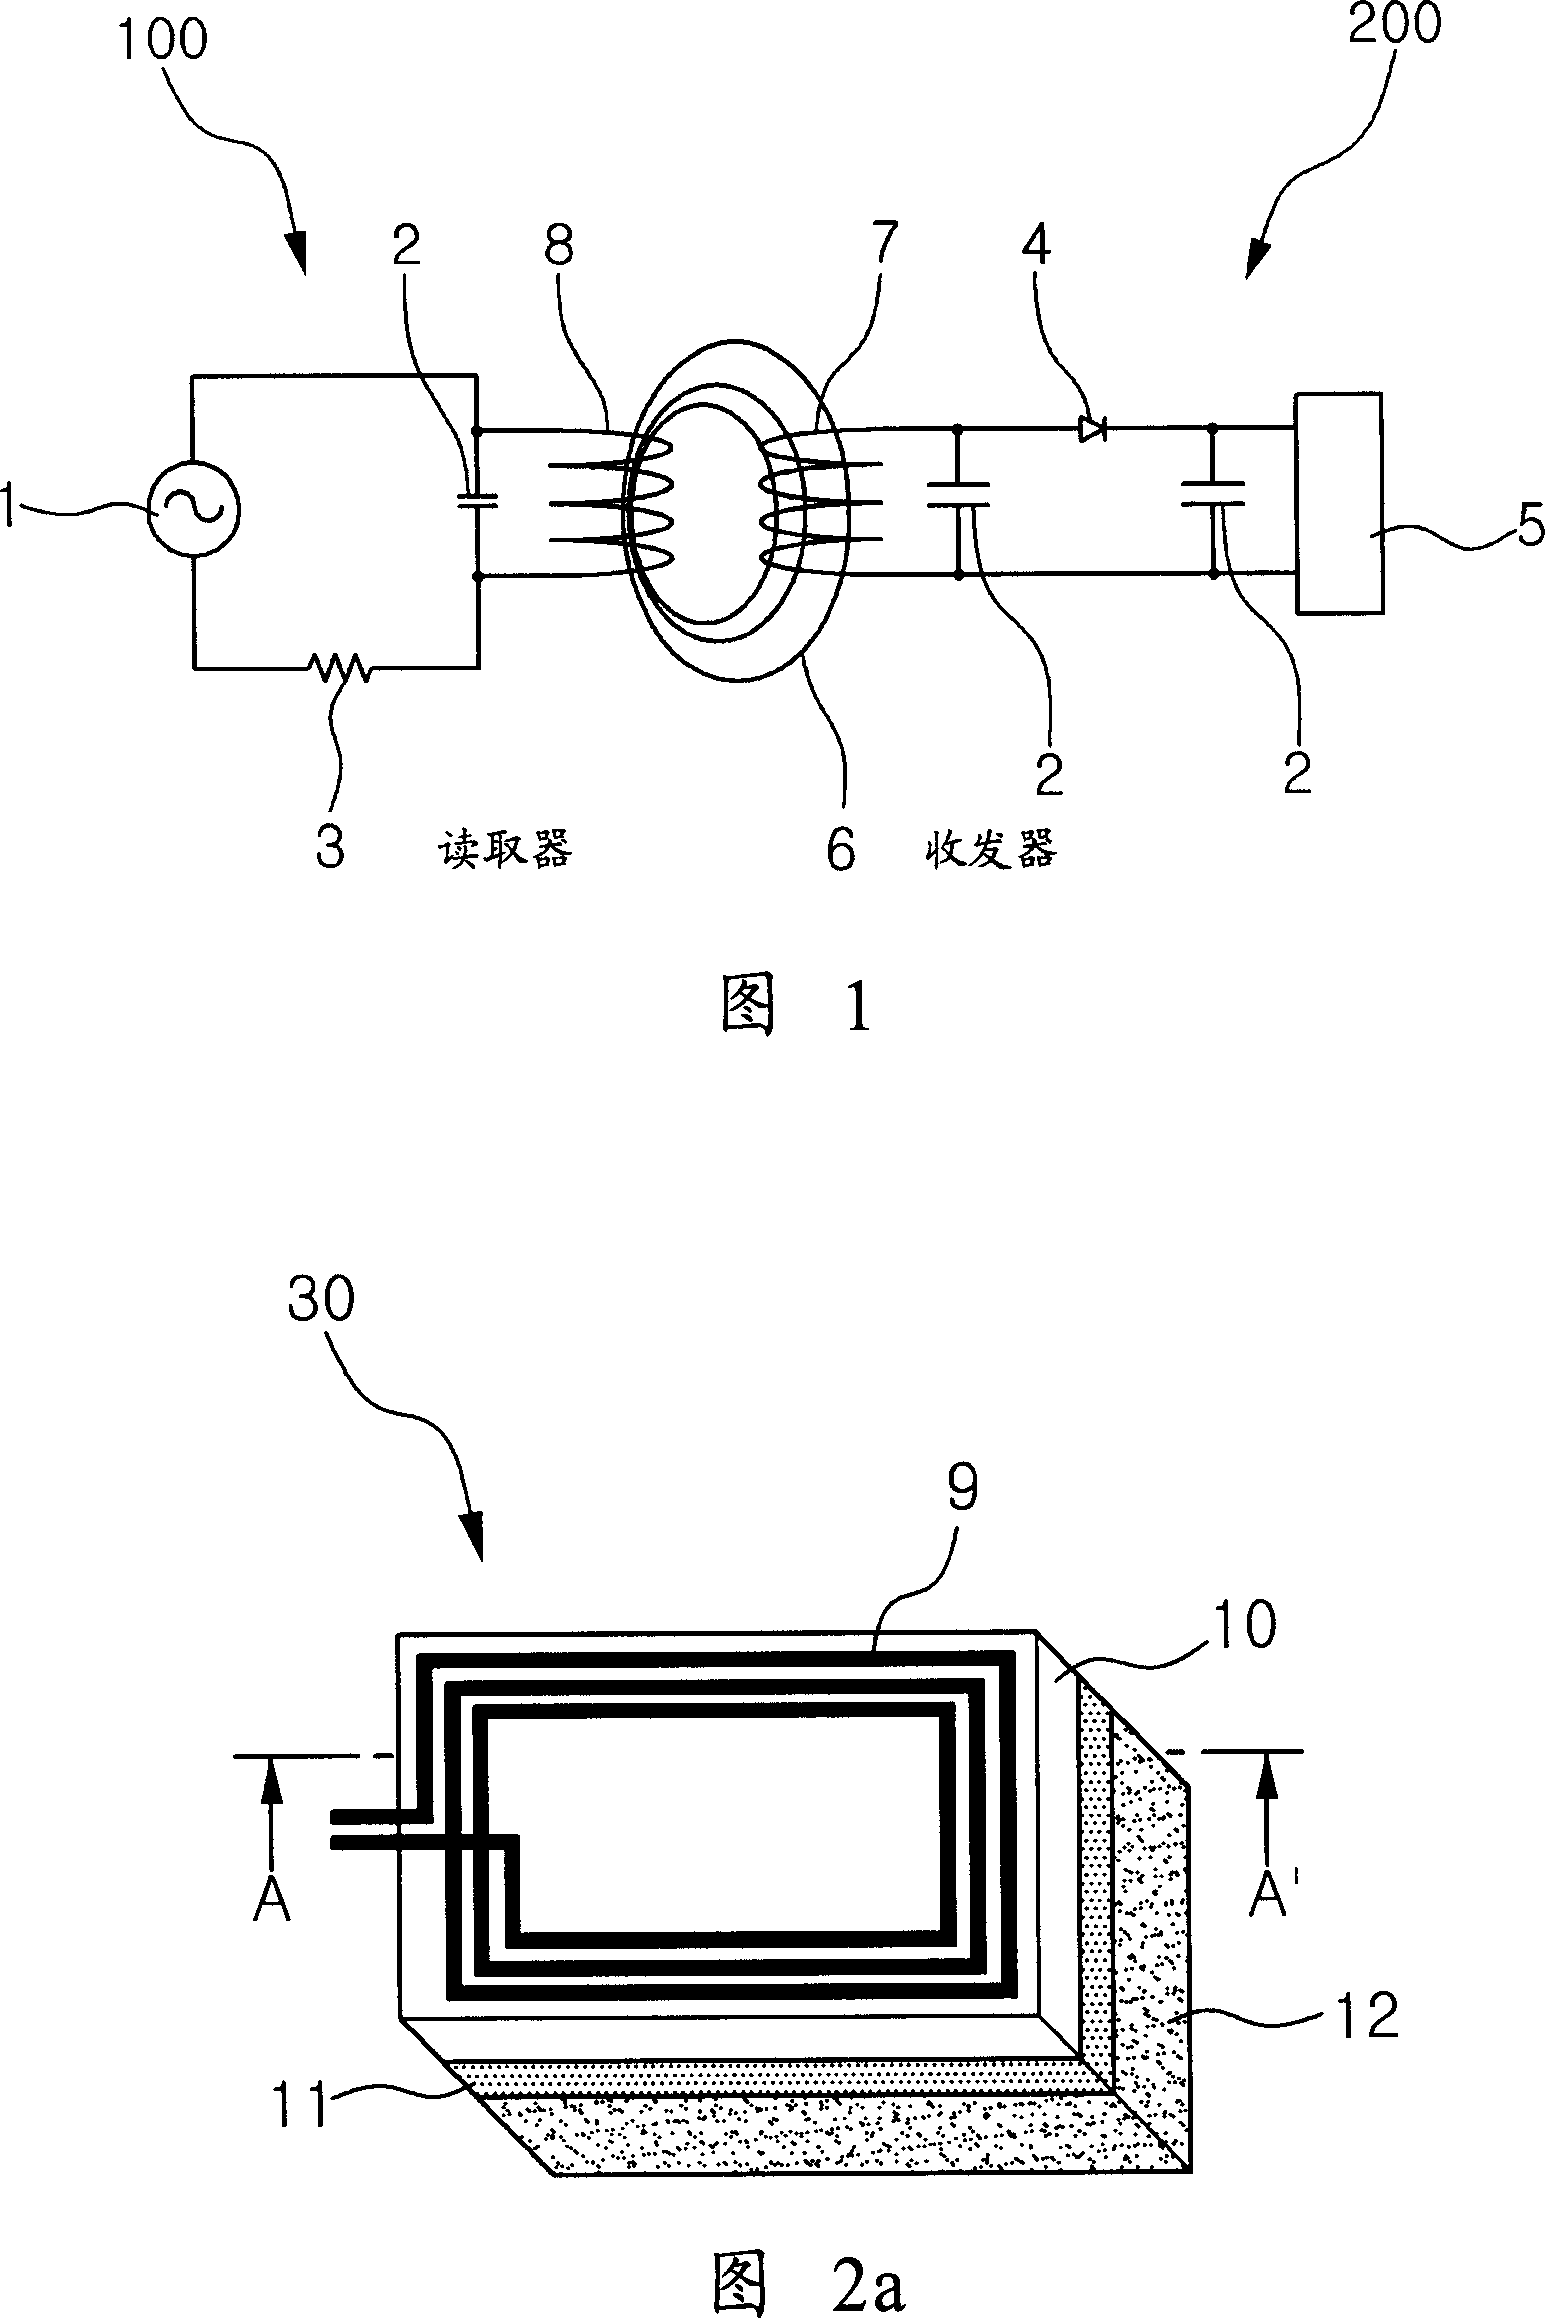 Absorber for radio-frequency identificating antenna, preparation method thereof and radio-frequency identificating antenna using the same